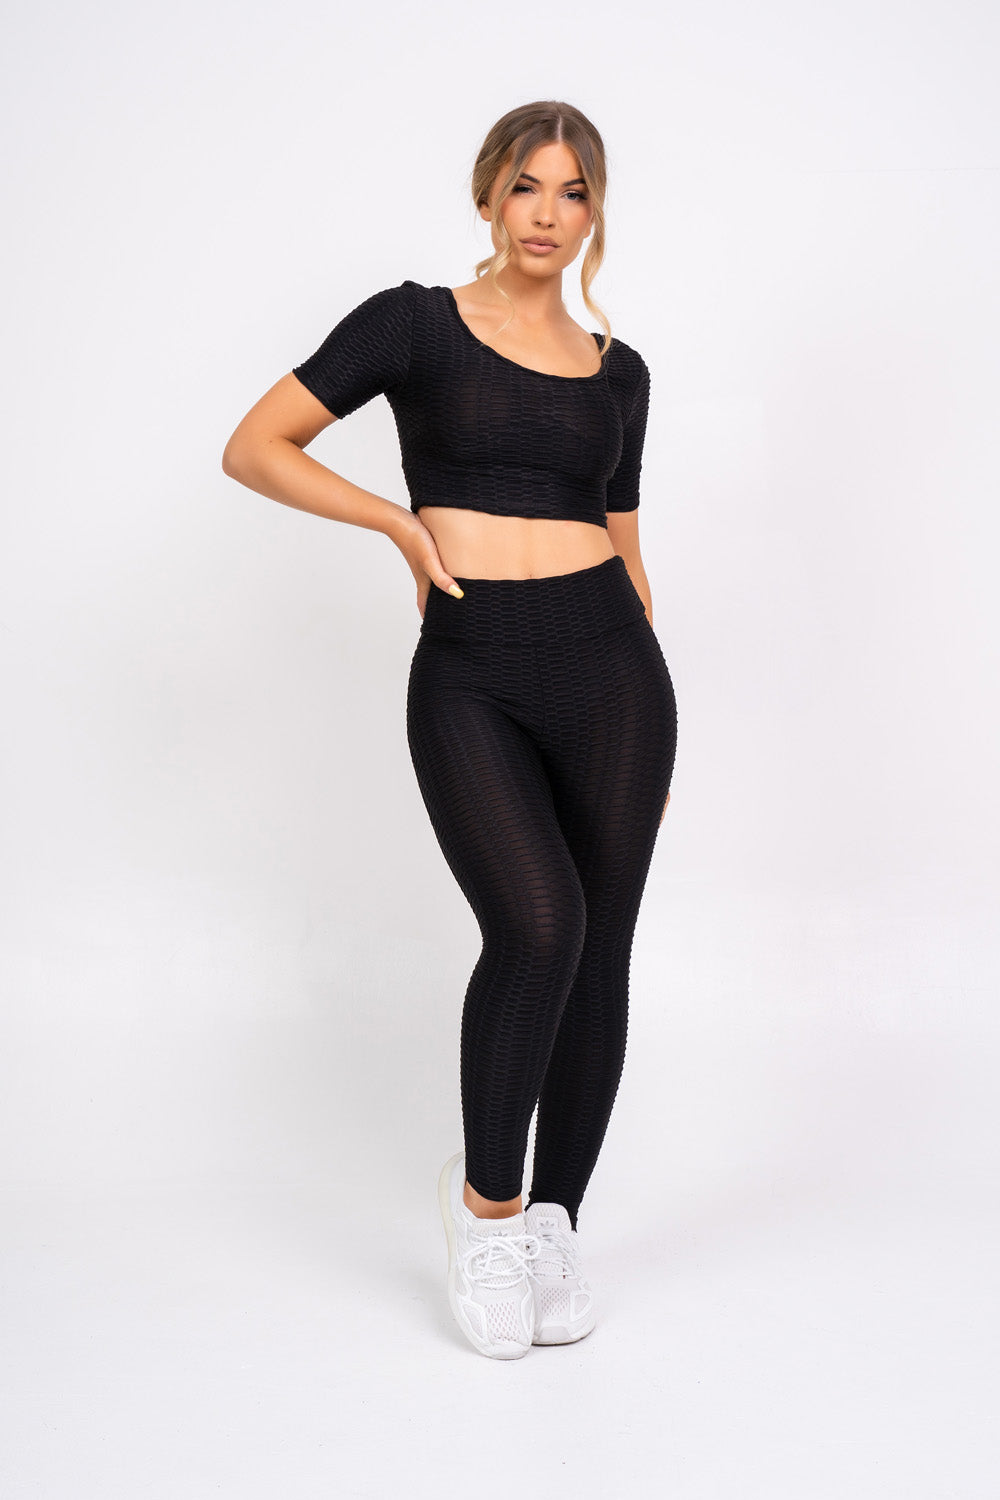 Dion Black Honeycomb Sports Cropped Top & leggings Co-ord Fitness Set –  Nazz Collection